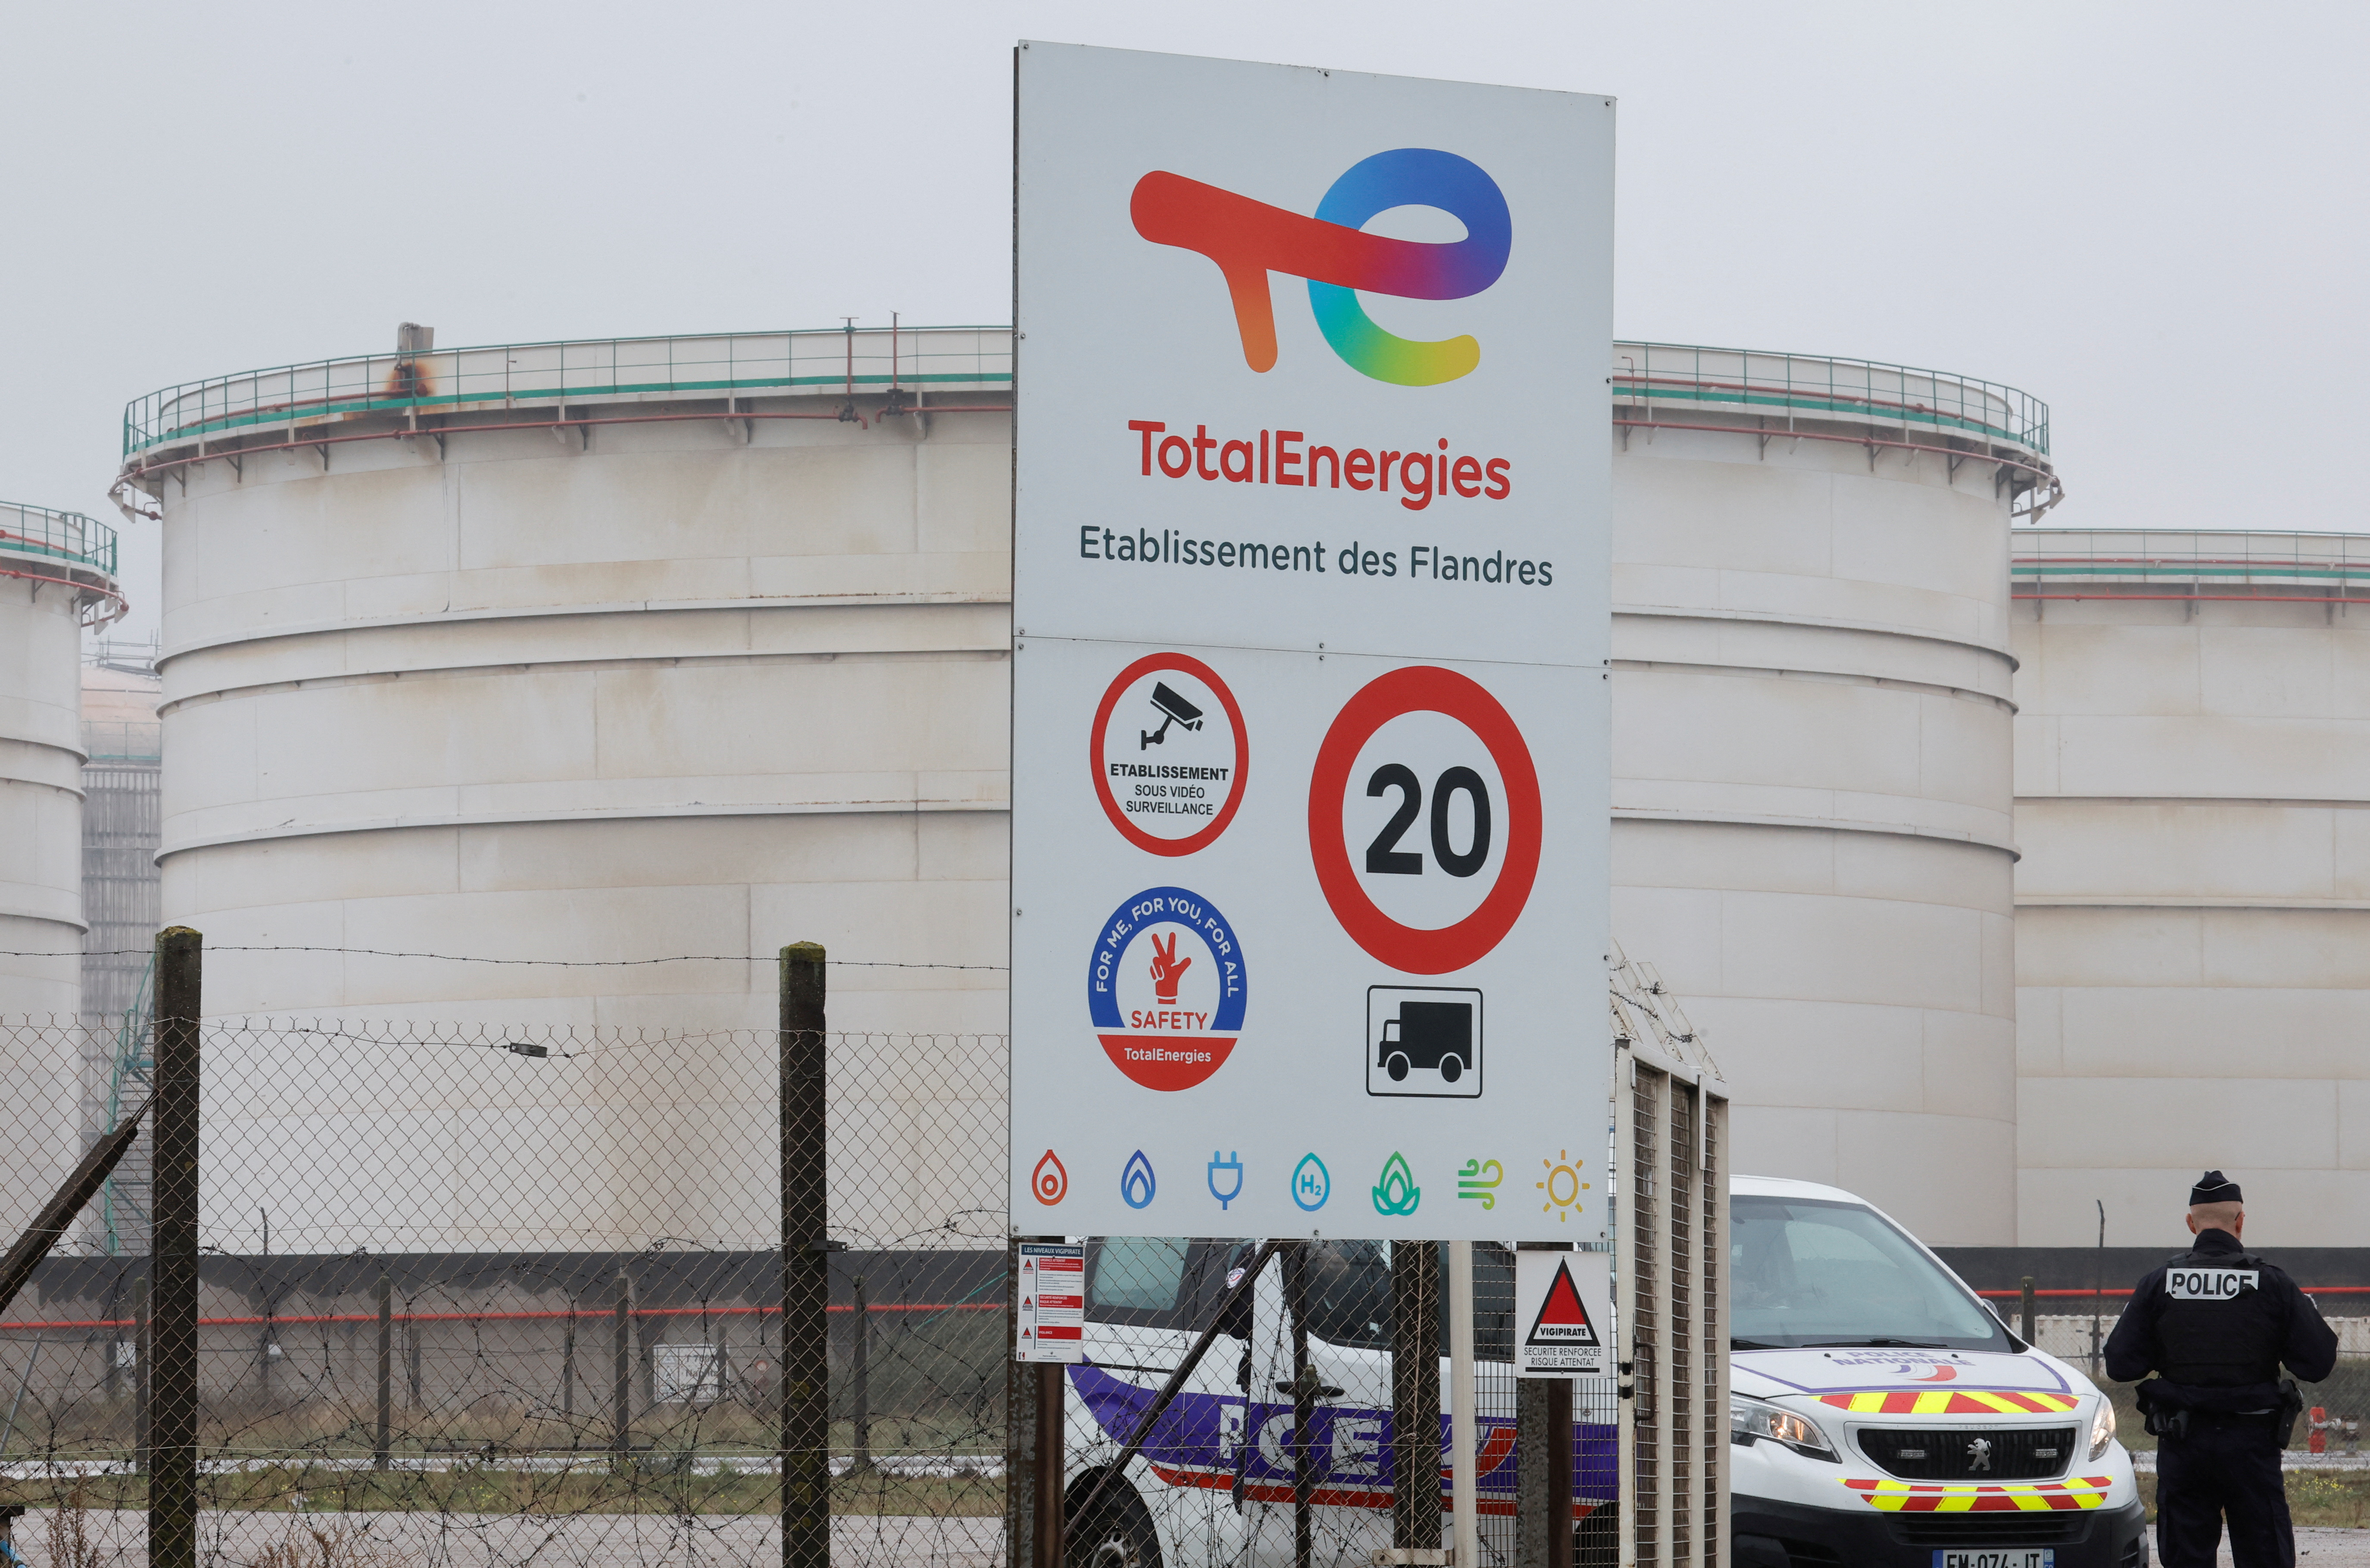 French policemen stand guard in front of giant TotalEnergies gasoline tanks of the former oil refinery in Mardyck